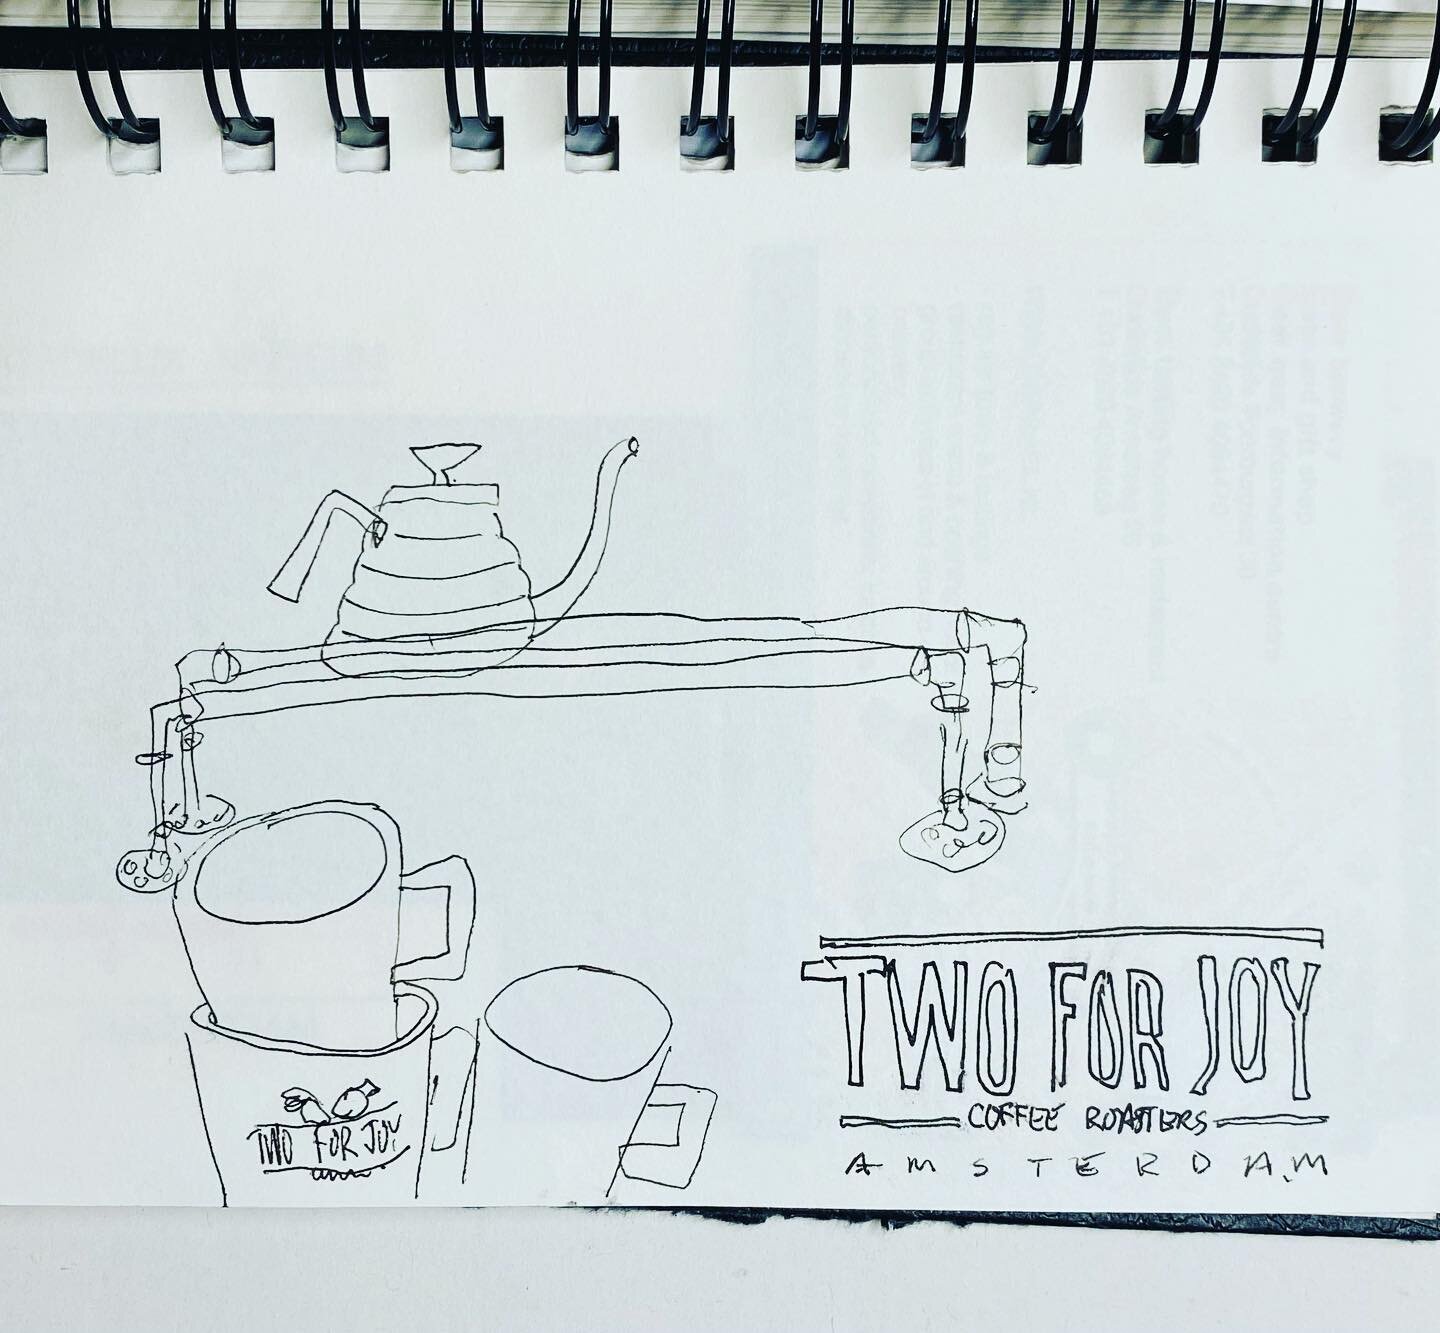 Sketchy Wednesday&rsquo;s 
.
One of our favorite spots from #amsterdam is @twoforjoycoffee 
A great roaster/cafe with amazing coffee and a wonderful design aesthetic!
.
KBL
.

#coffee #espresso #localcoffee
#coffeeroaster #singleorigincoffee #litchfi